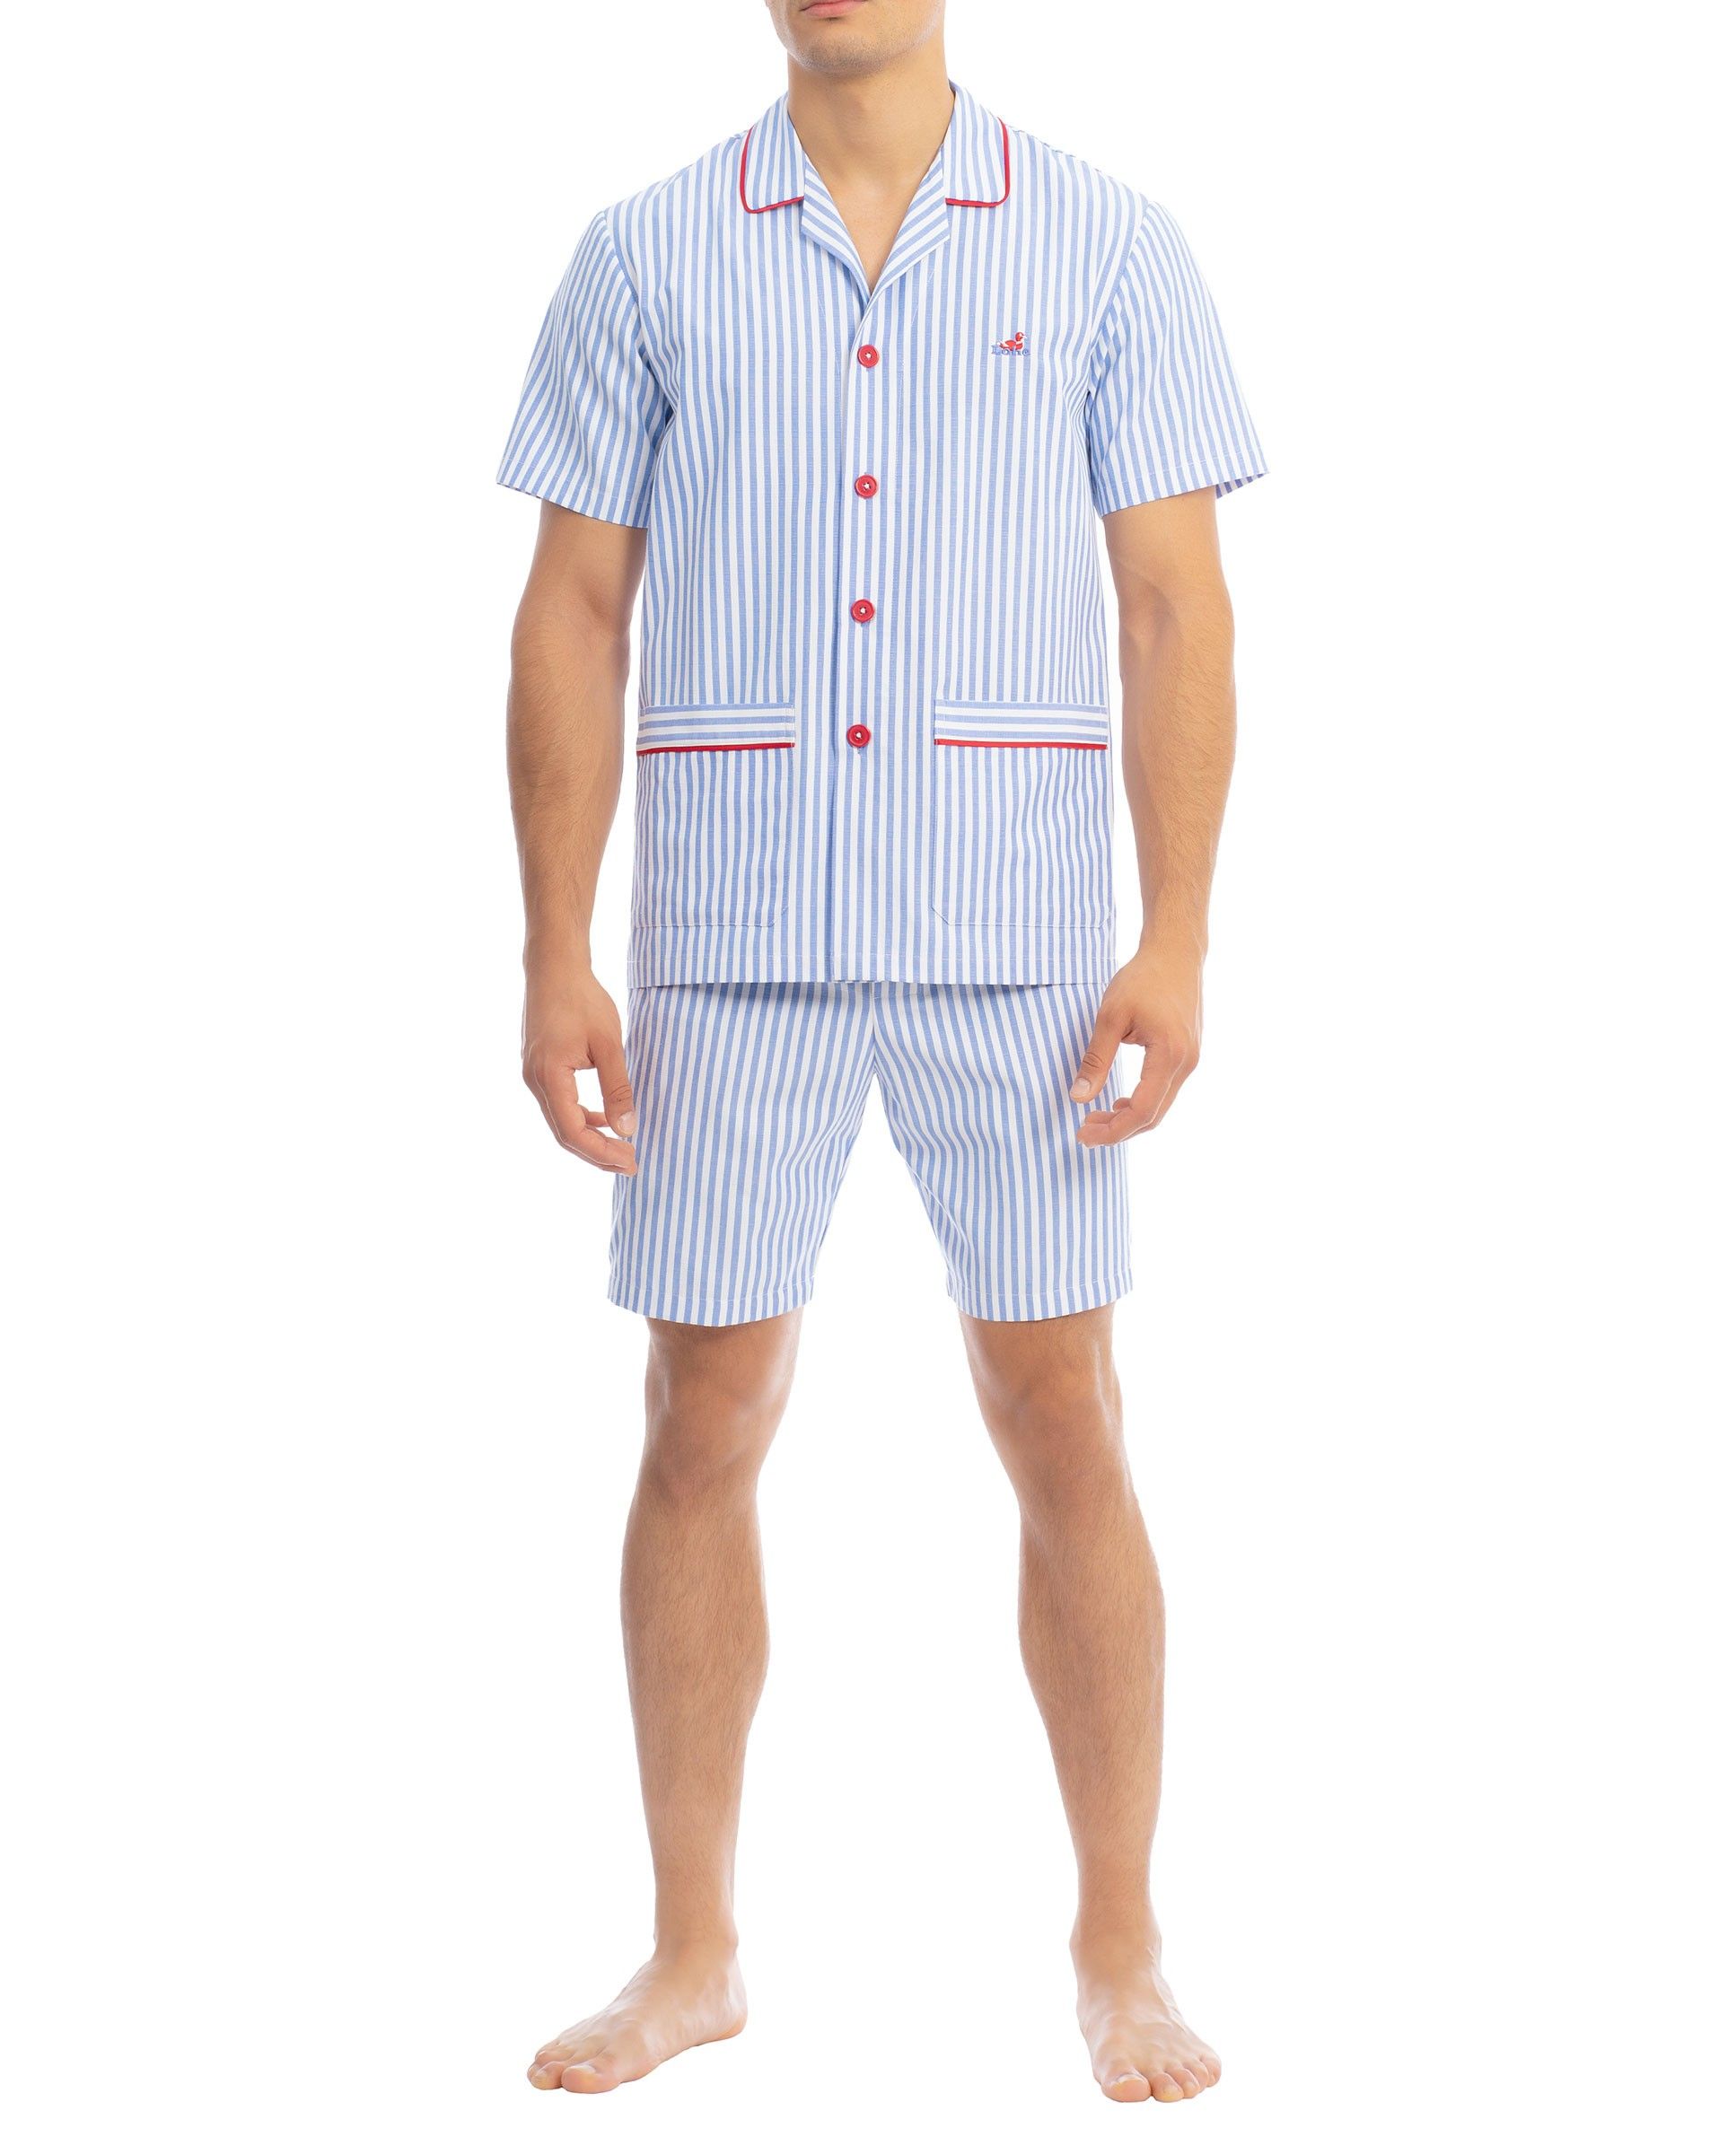 Men's short pyjamas summer collection with stripes. Short sleeves and red details